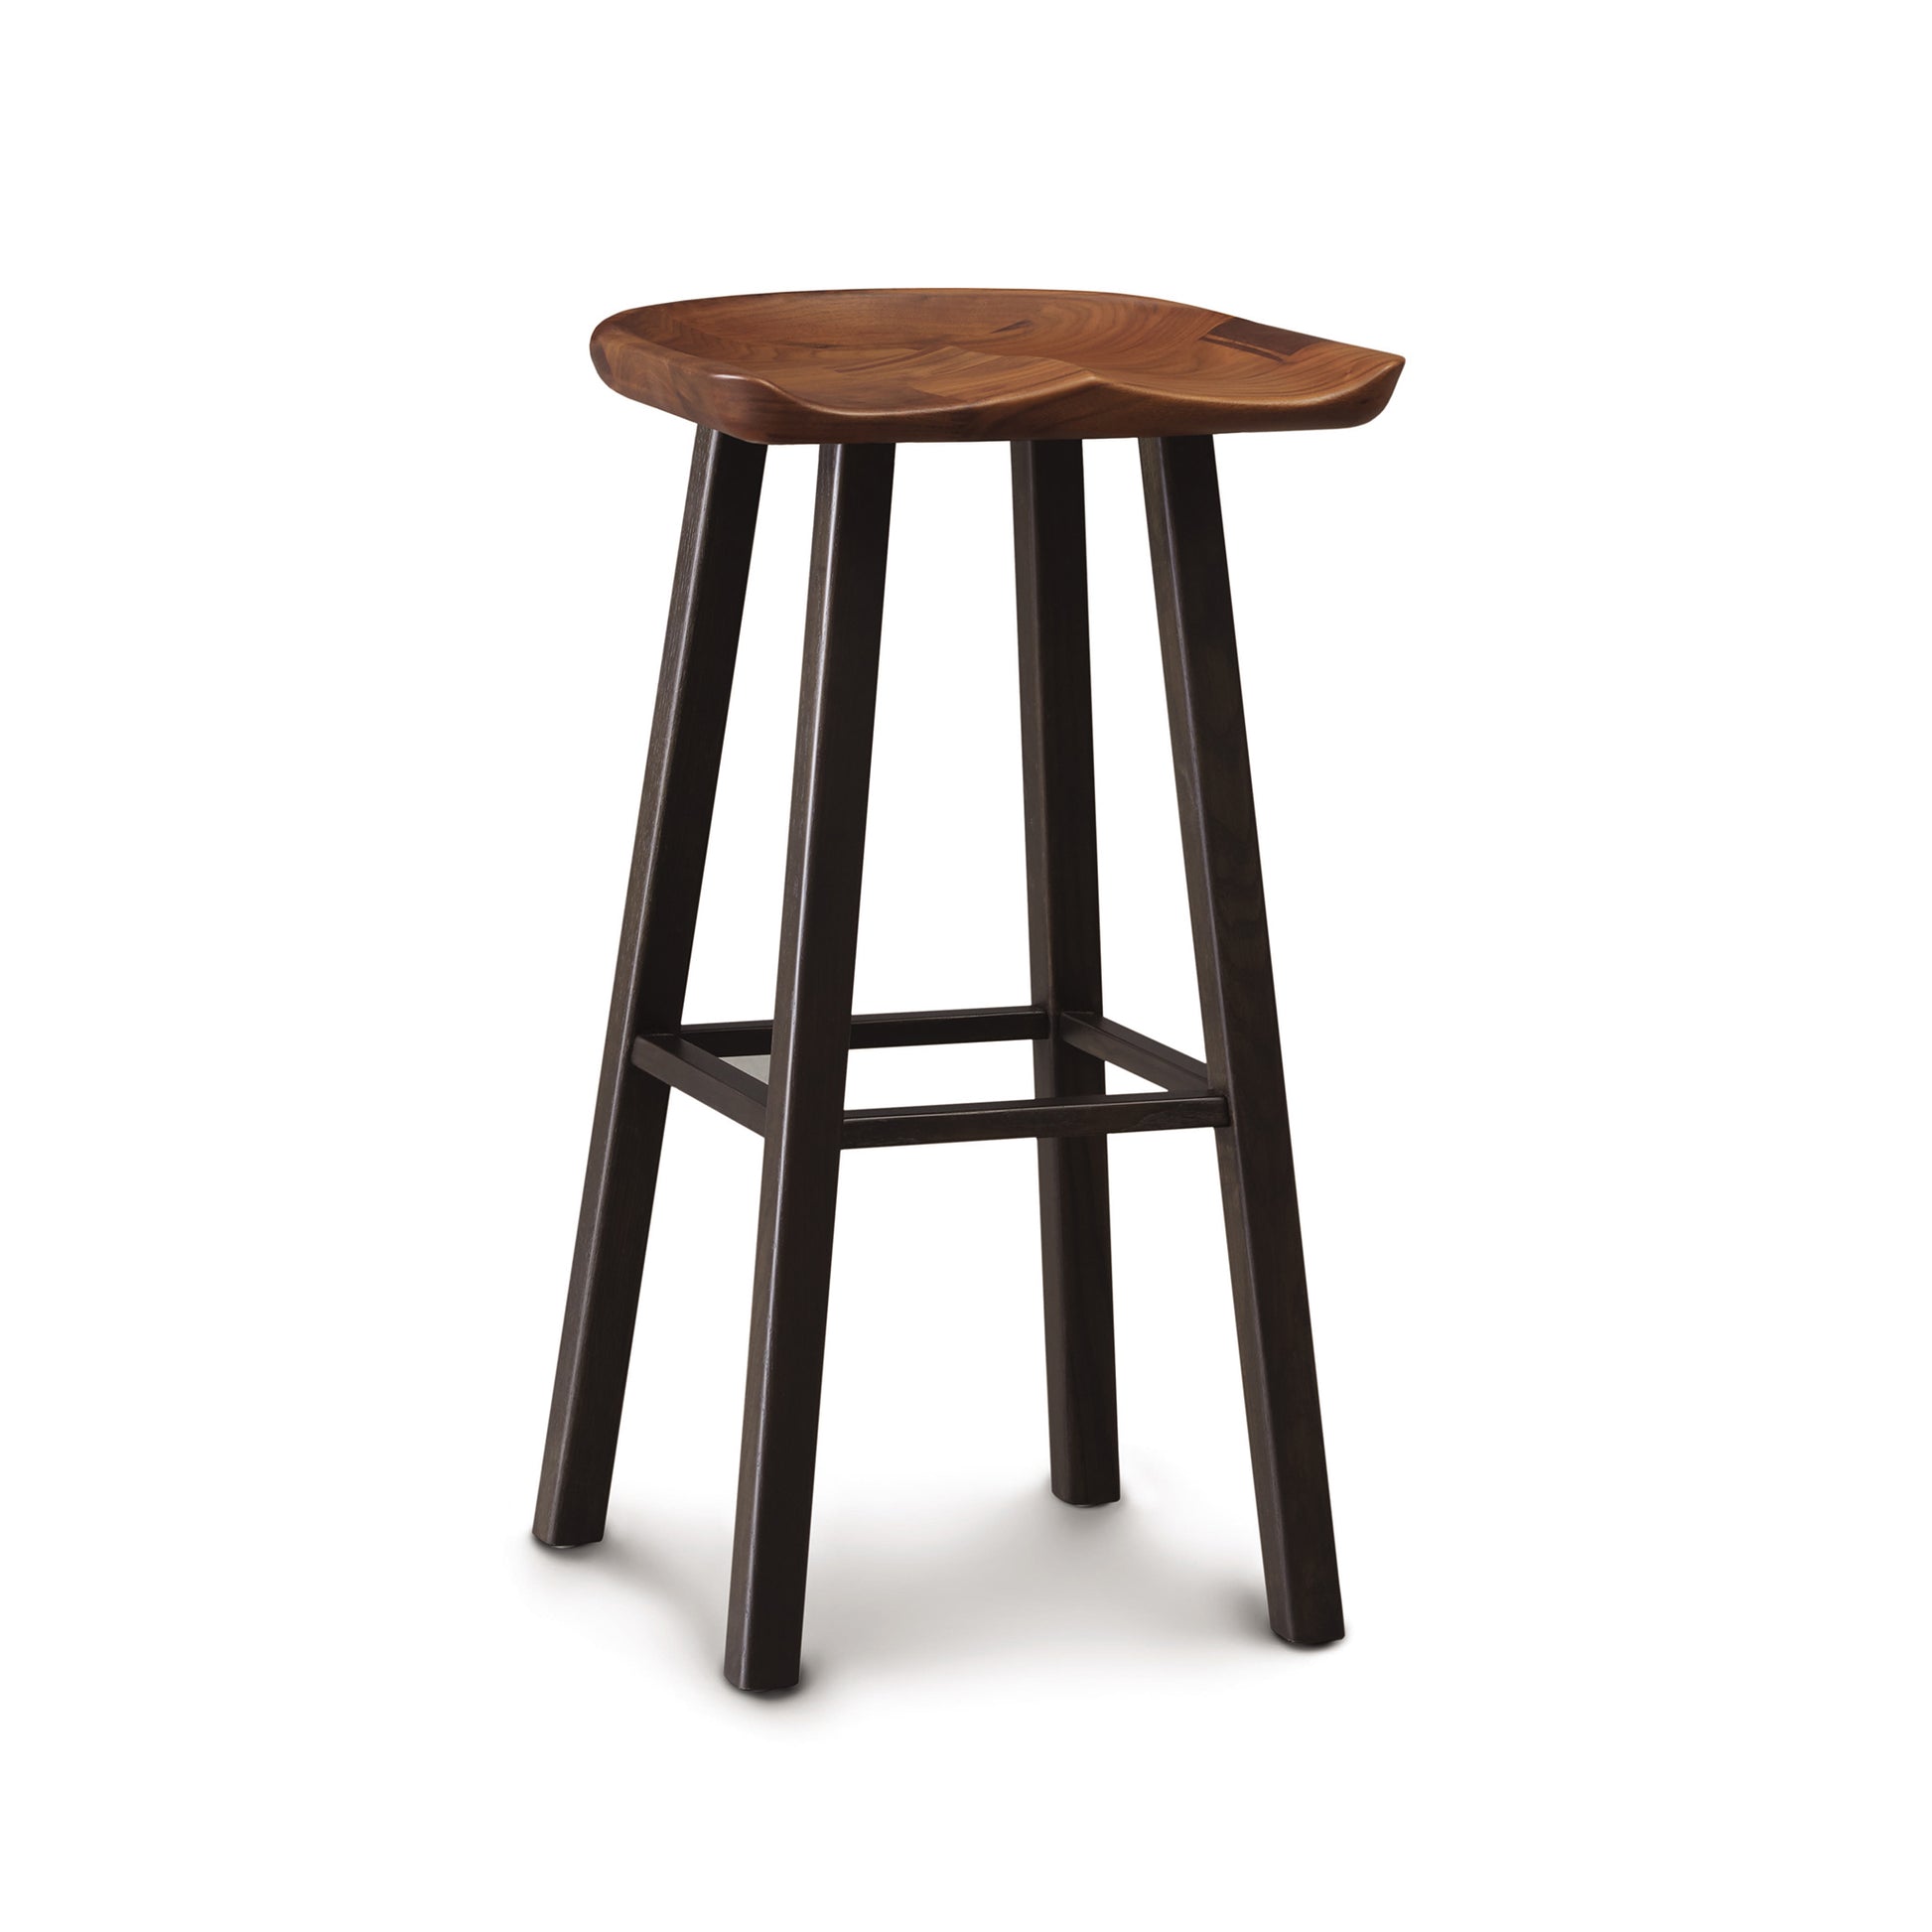 A Modern Farmhouse Tractor Bar Stool from Copeland Furniture with a contoured tractor seat and four seared oak wood legs, isolated on a white background.